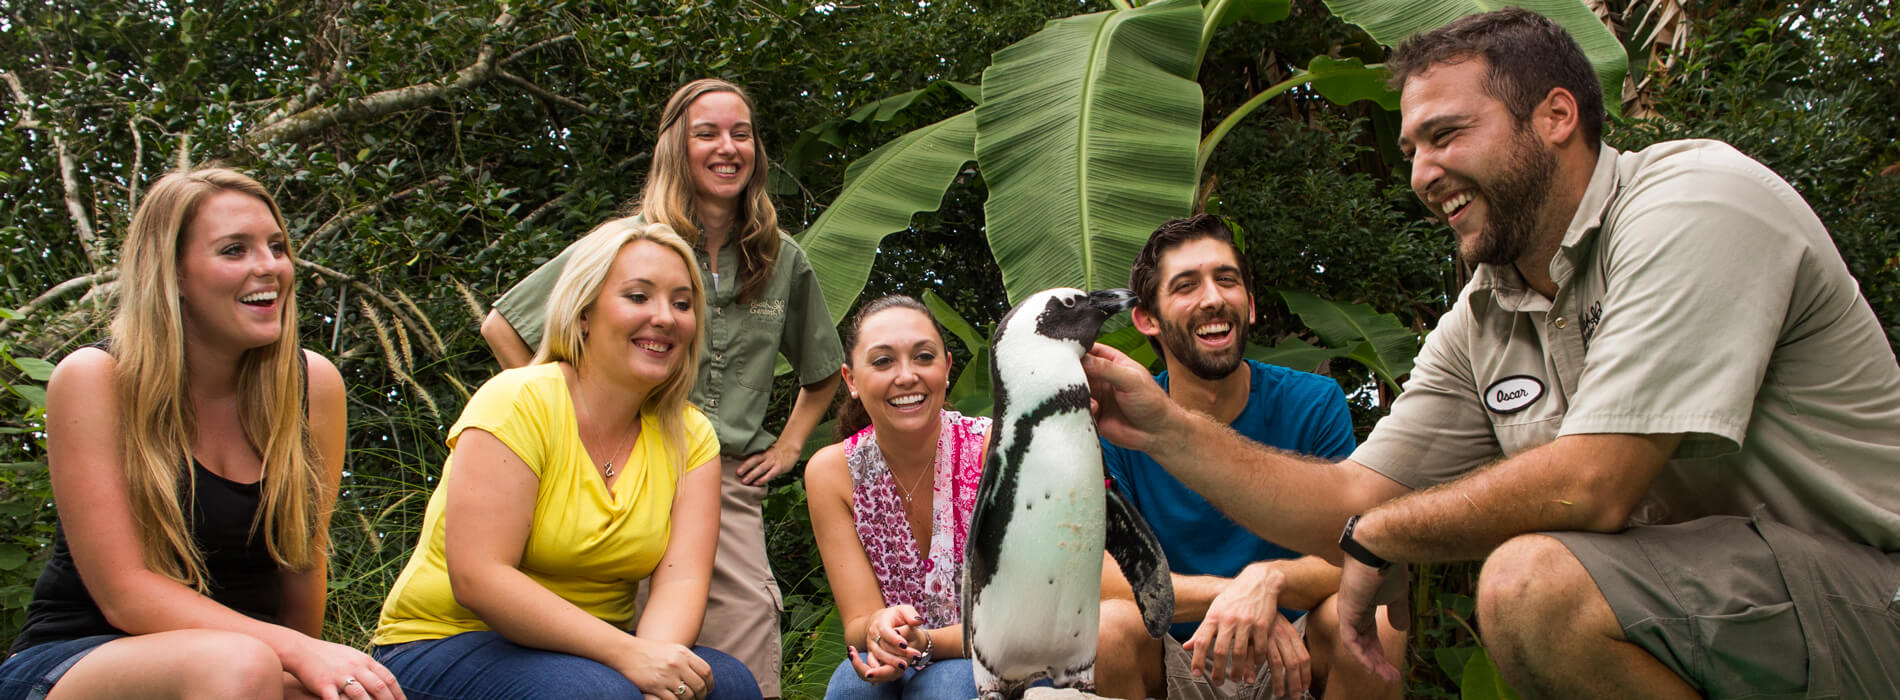 Get up close and interactive with the penguin insider tour